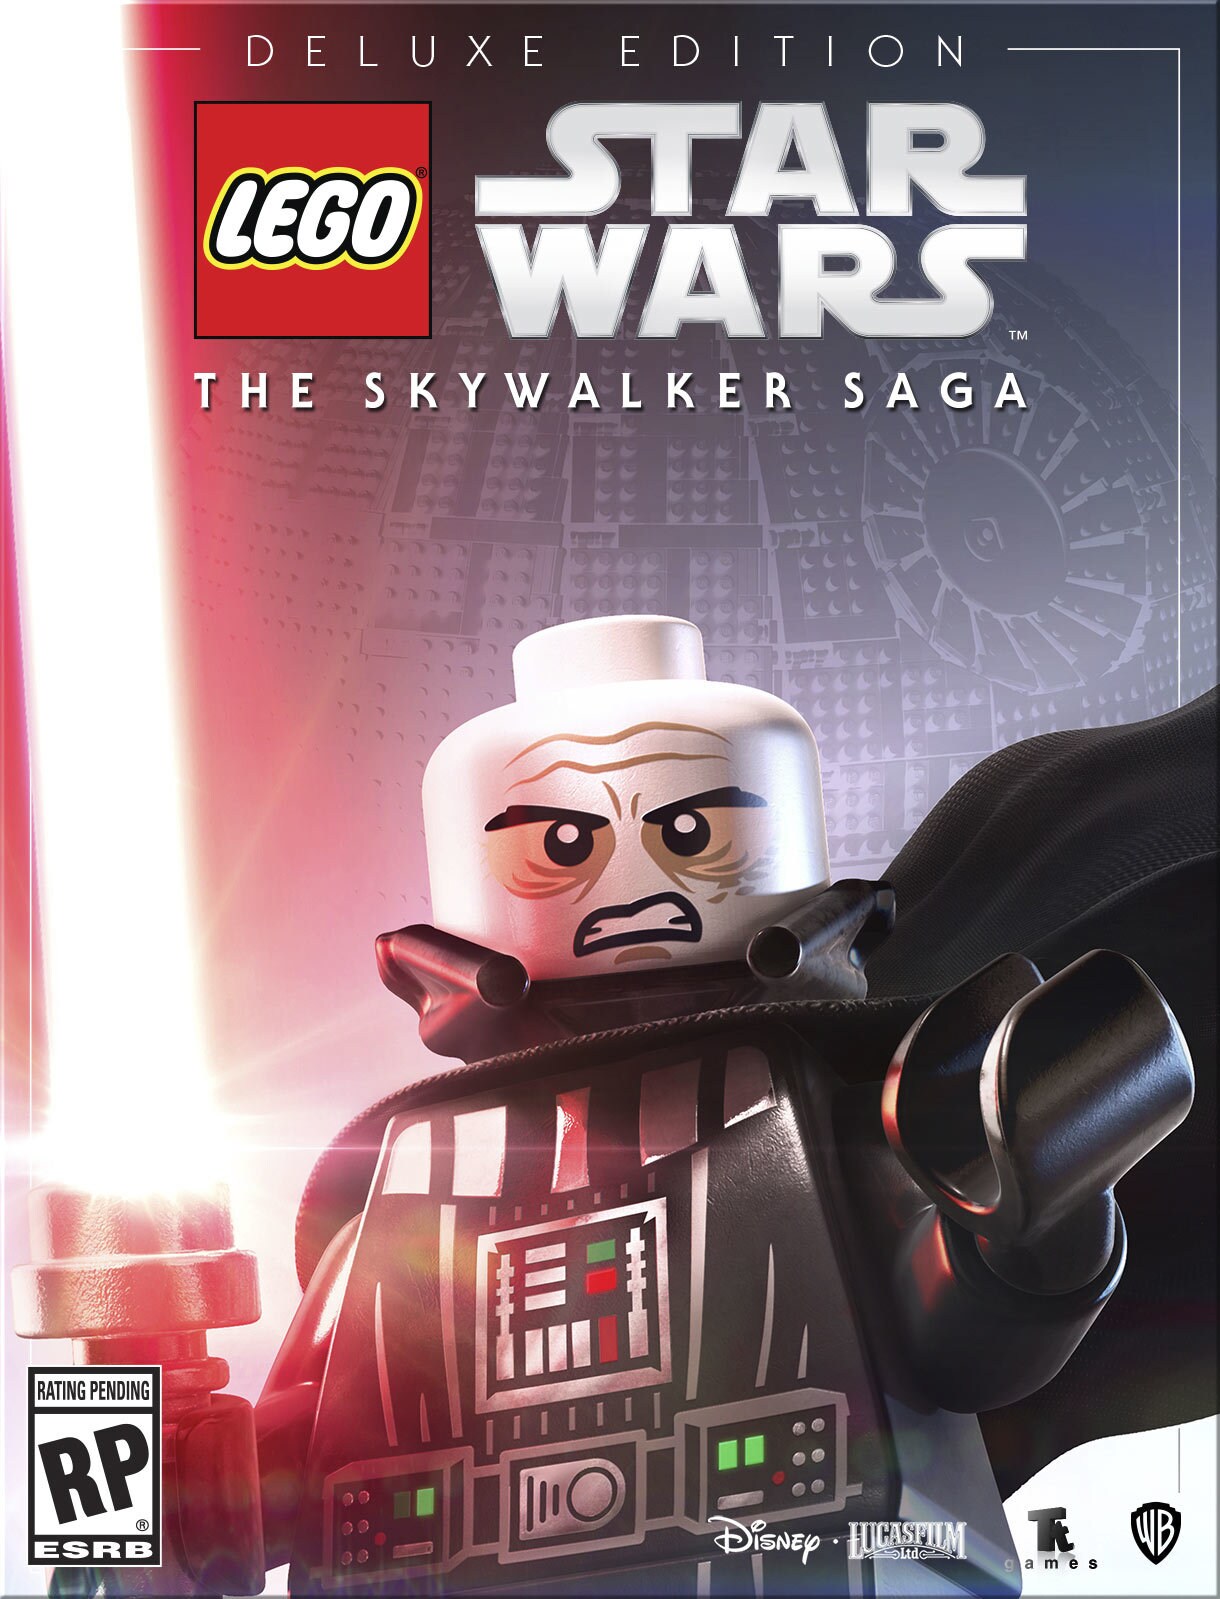 LEGO Star Wars: The Skywalker Saga Deluxe Edition box art without helmet